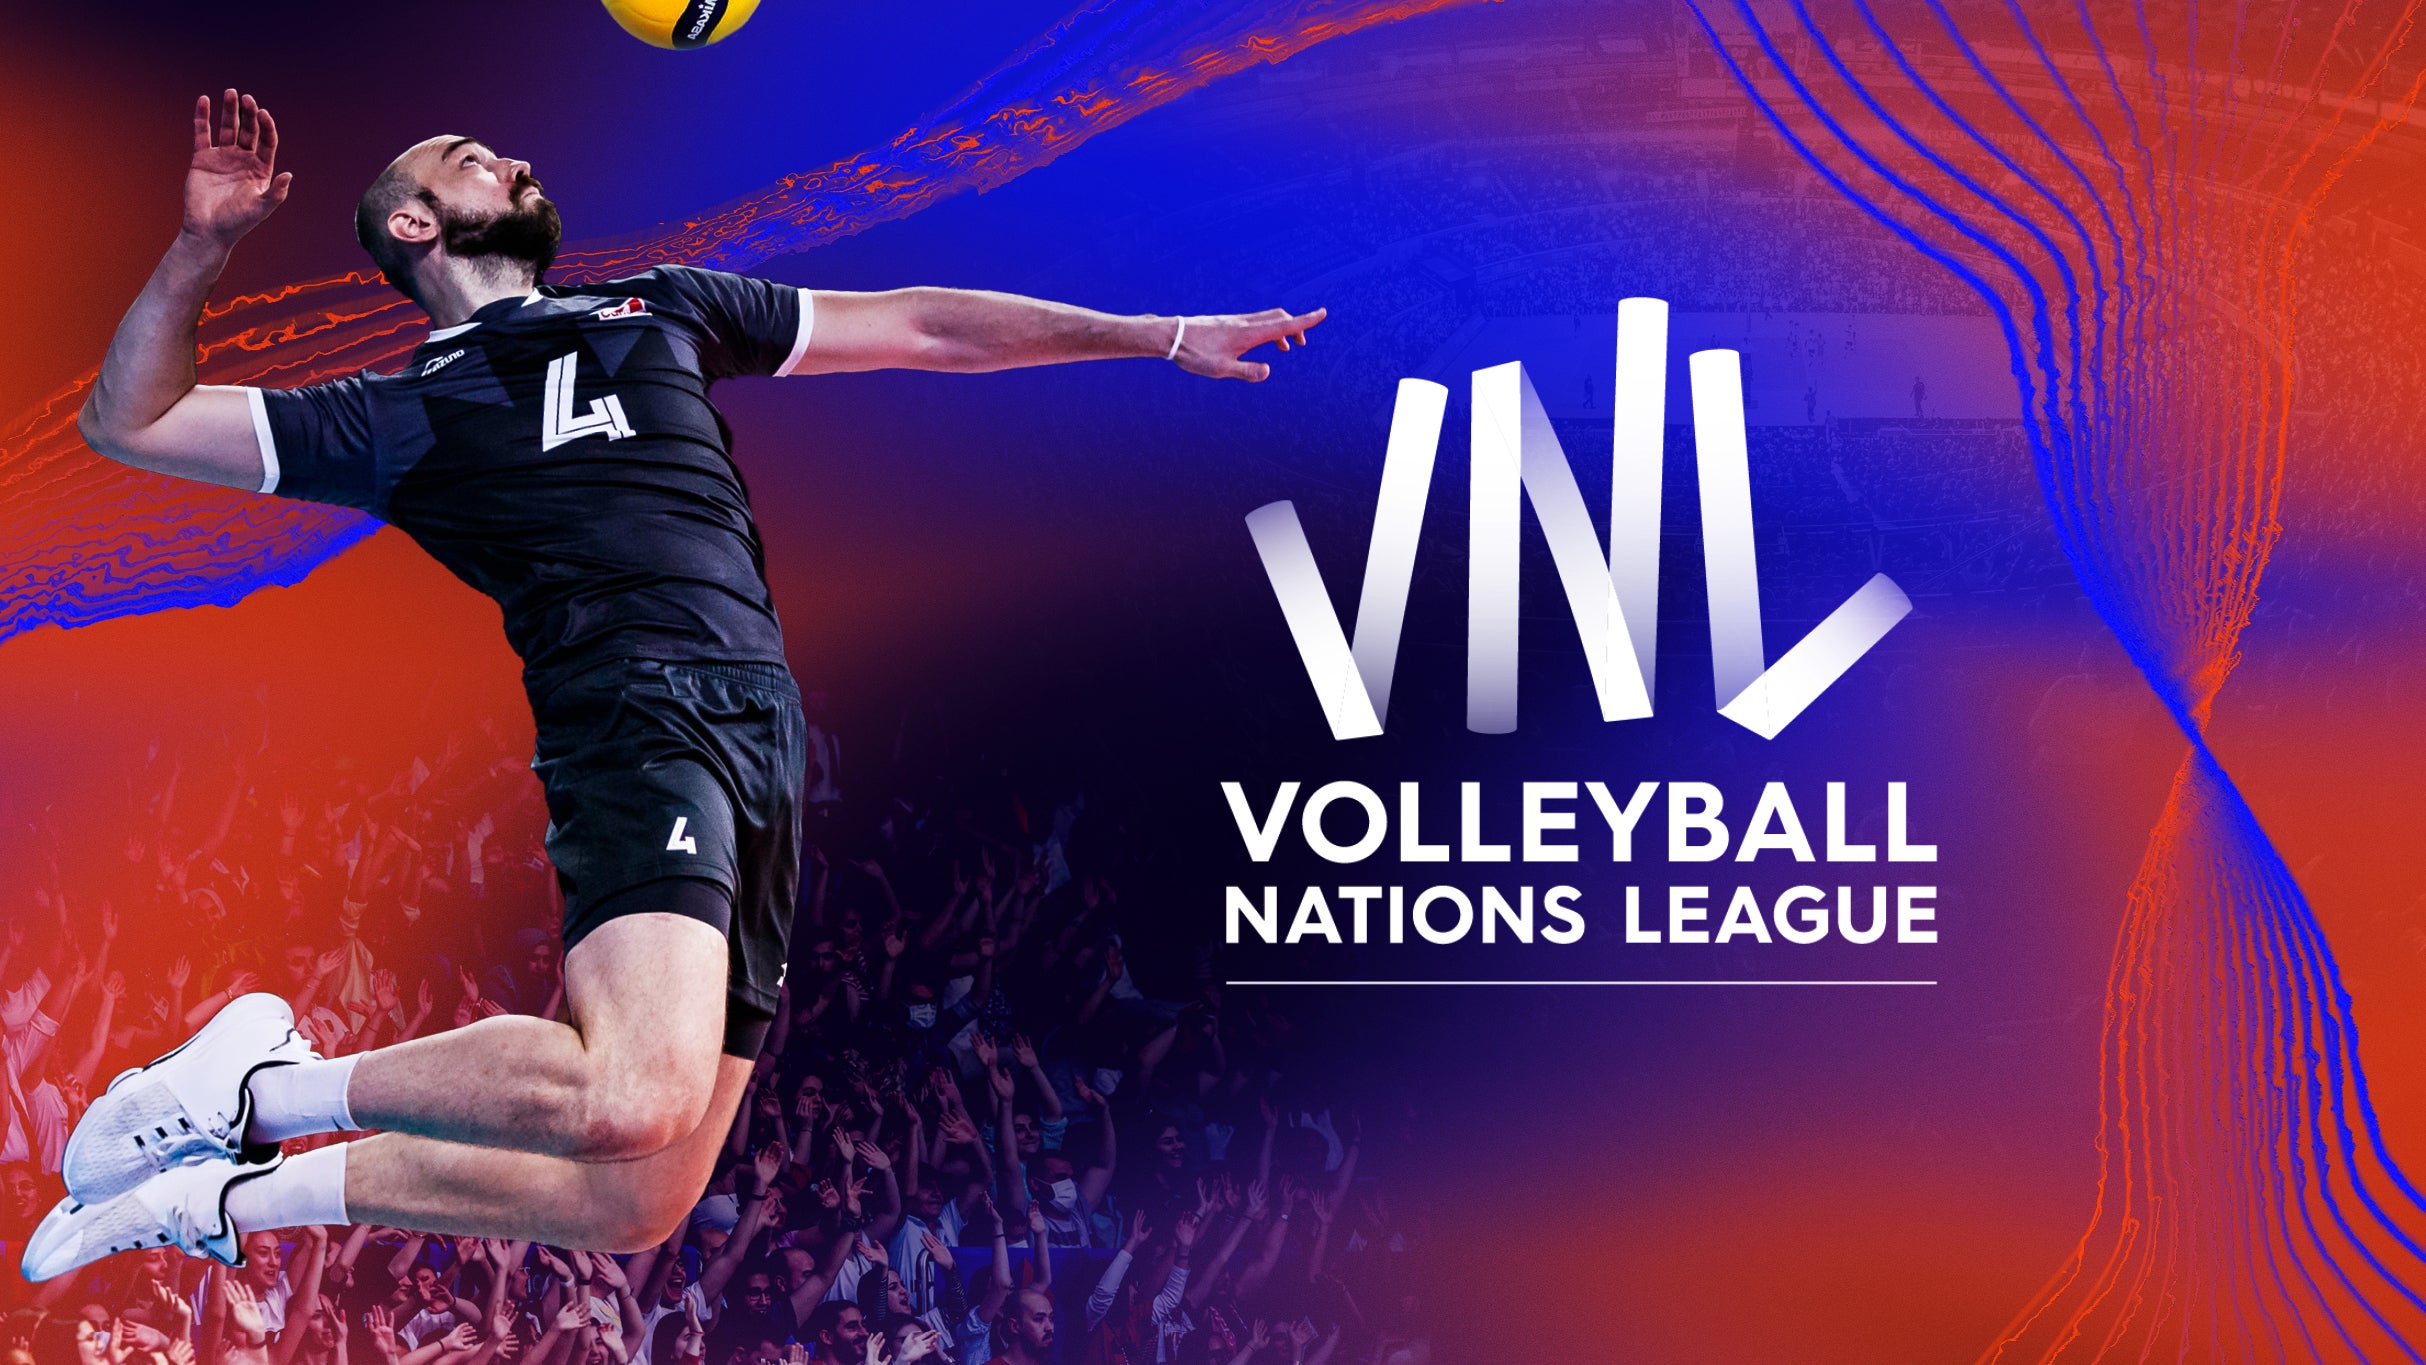 Volleyball Nations League - June 10 in Ottawa promo photo for Volleyball Canada presale offer code